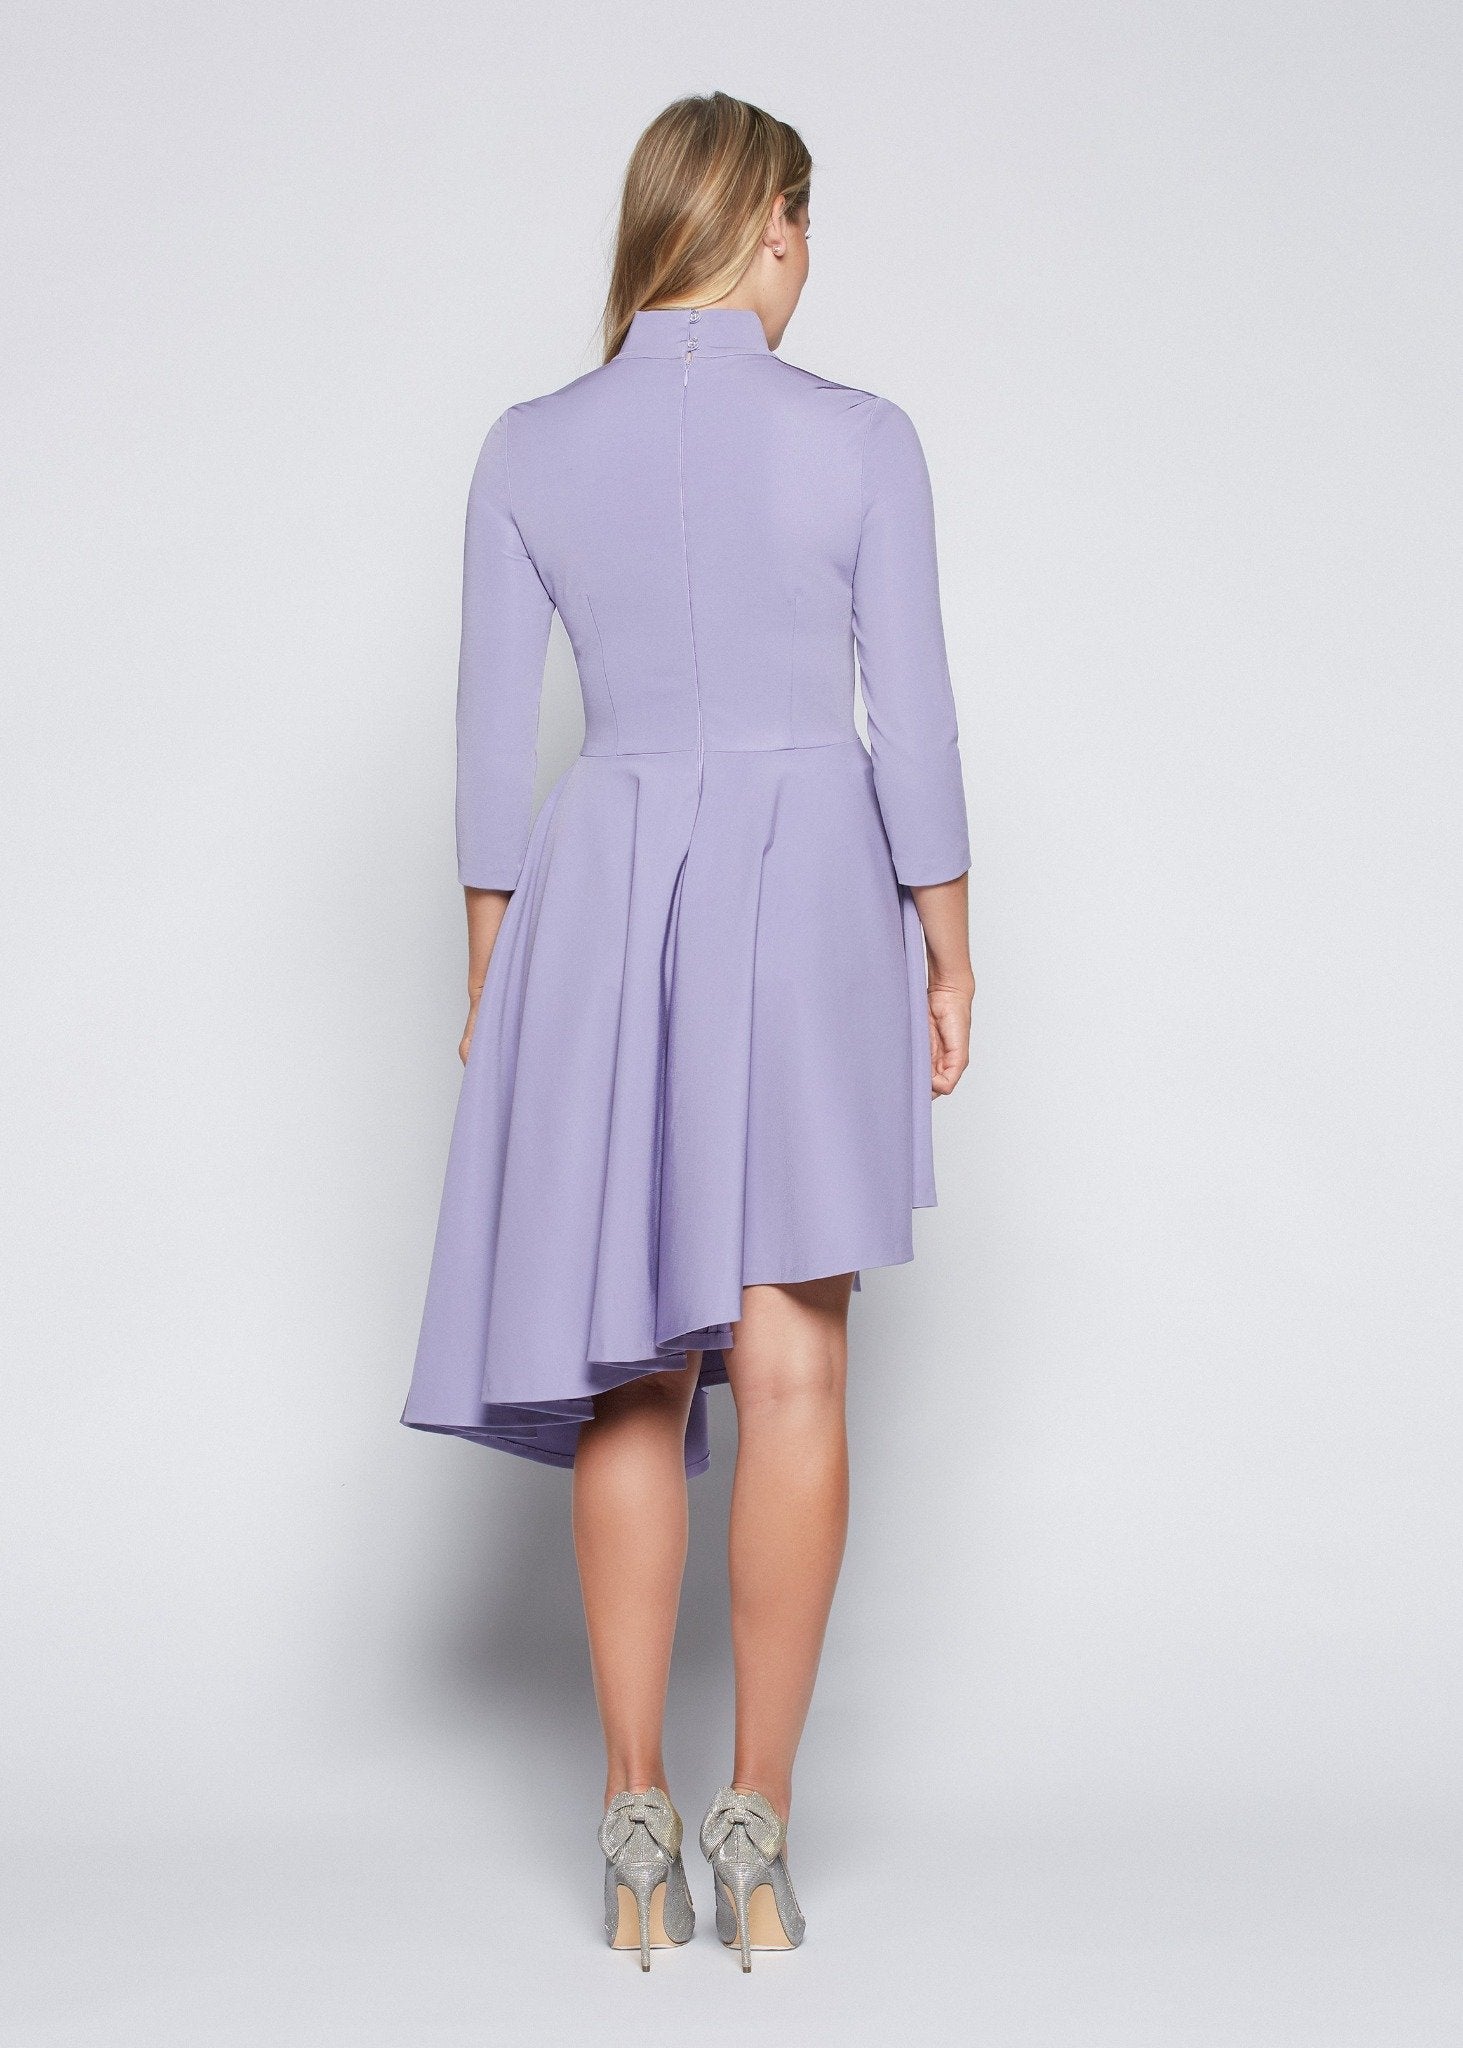 Back view of a woman wearing an asymmetric mock neck fuller bust dress with 3/4 length sleeves and side seam pockets in lilac stretch viscose fabric by Miriam Baker.